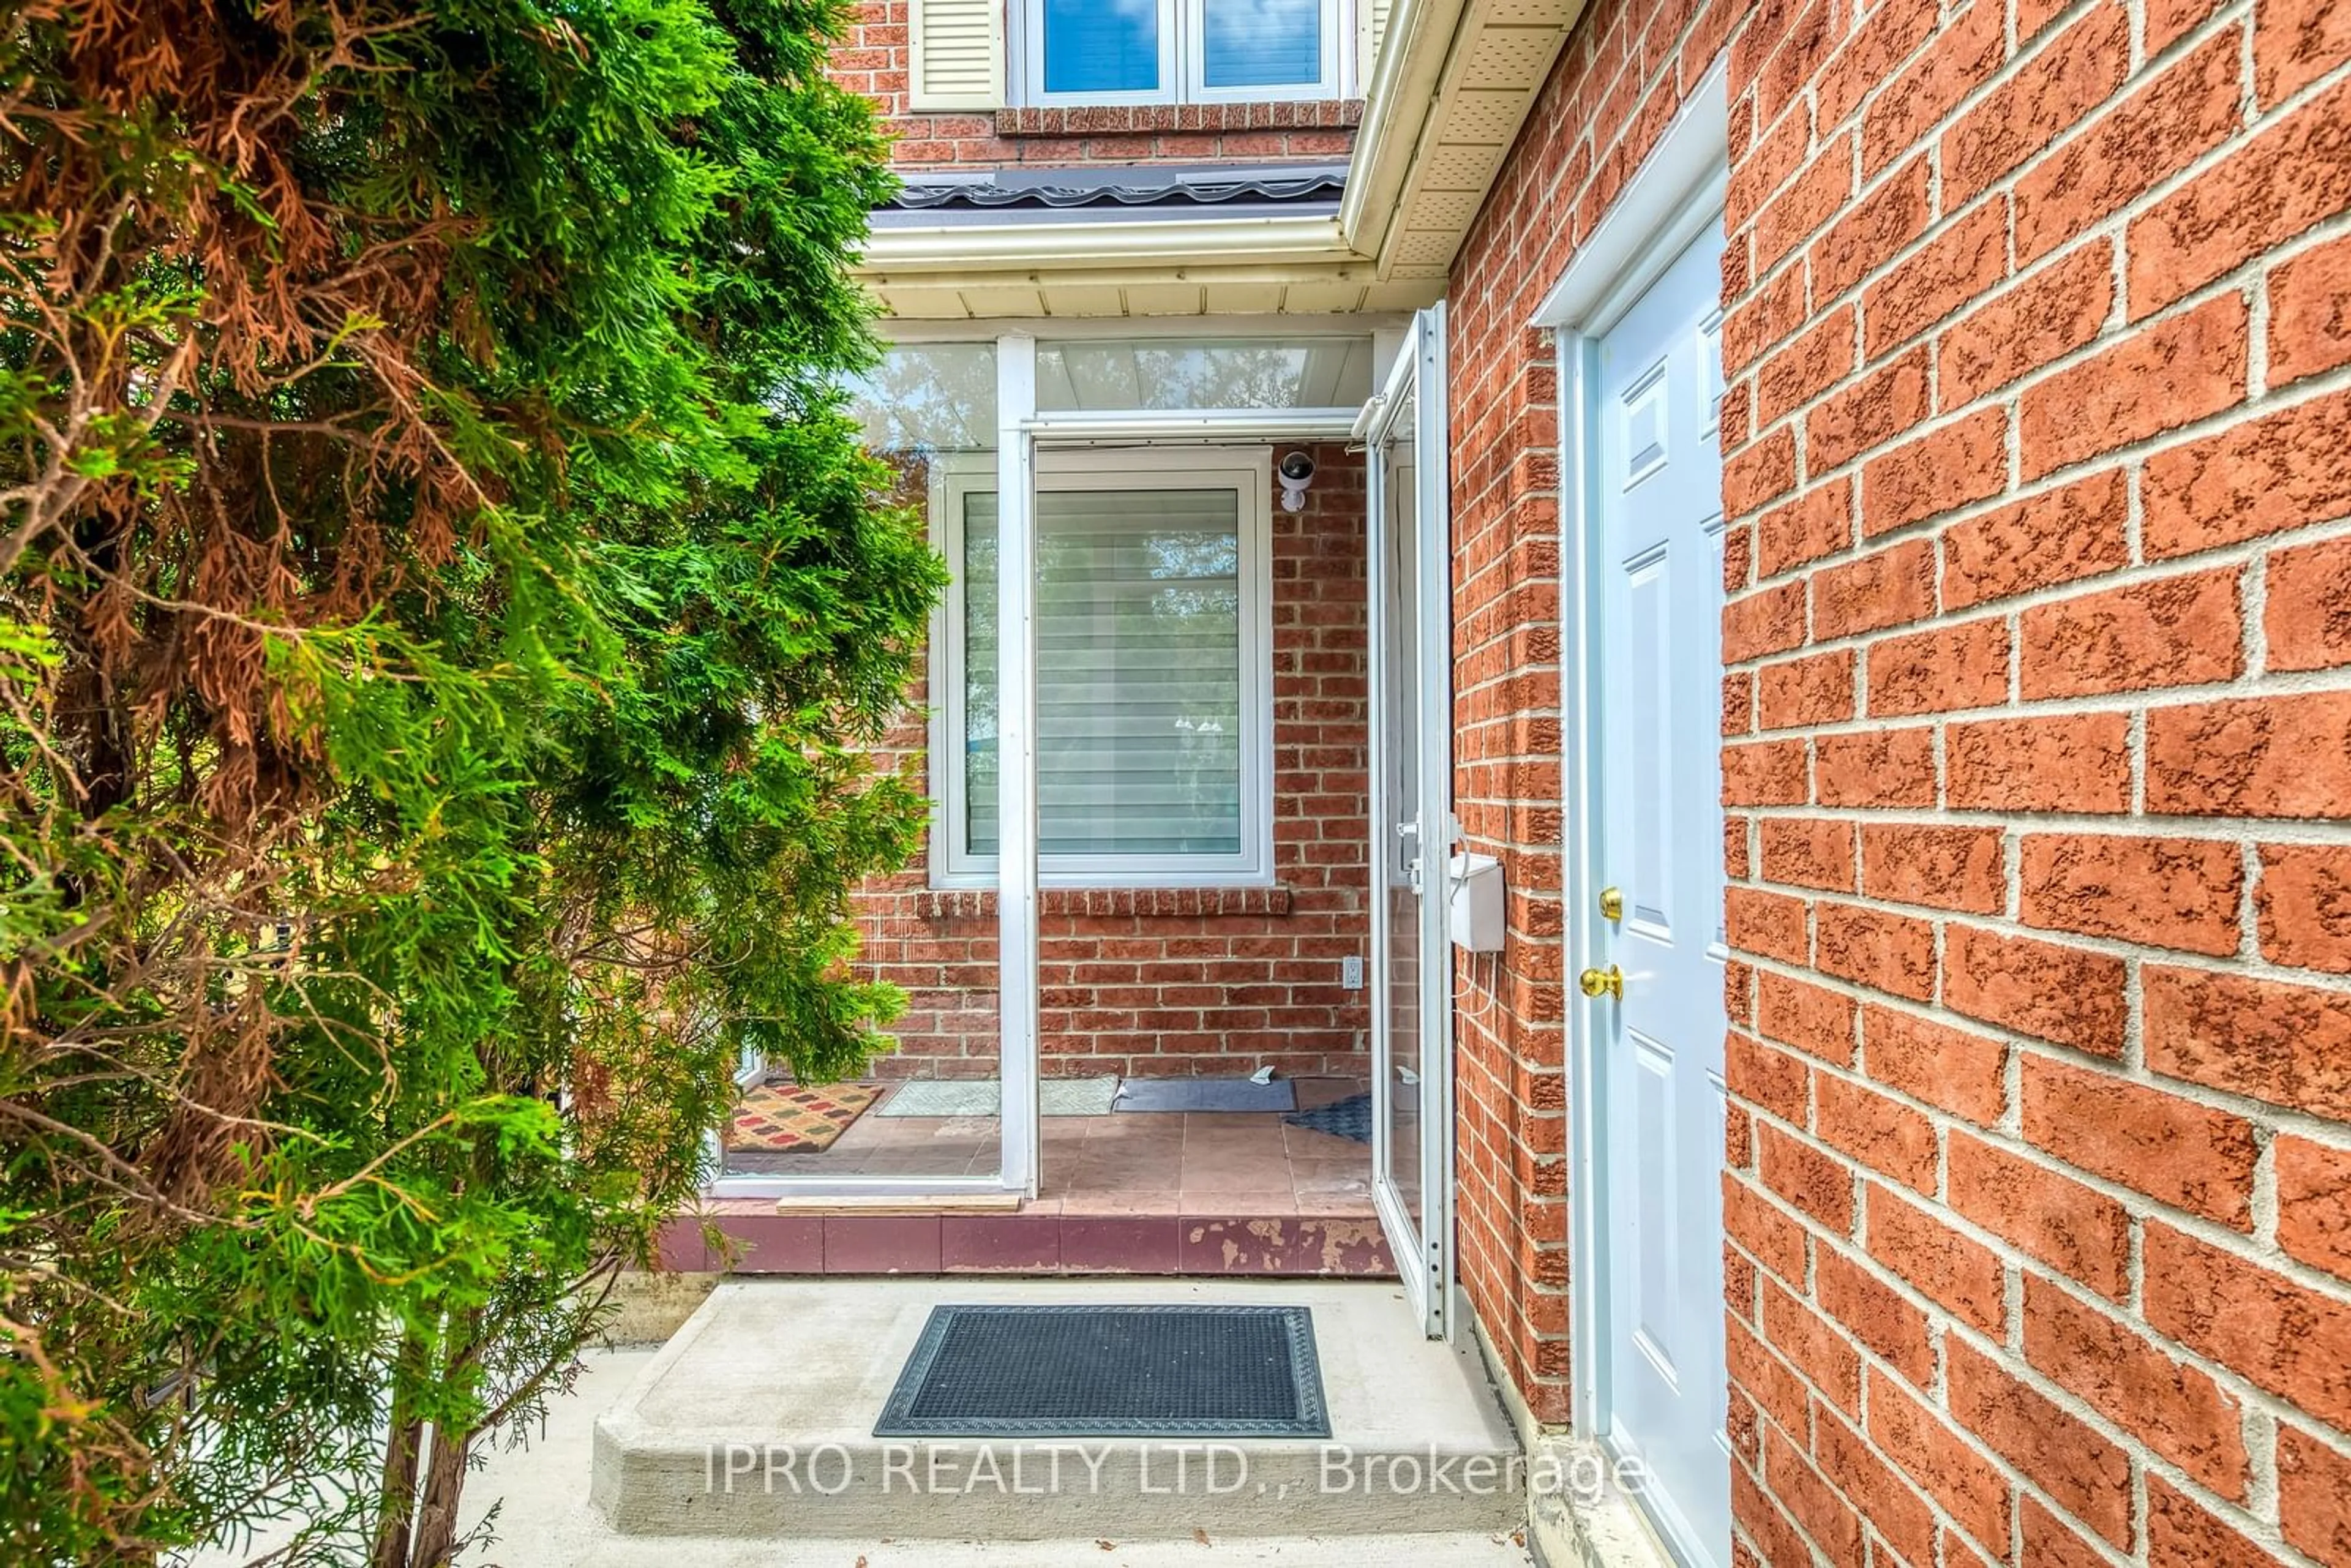 Home with brick exterior material for 3500 Croatia Dr, Mississauga Ontario L5B 3K9